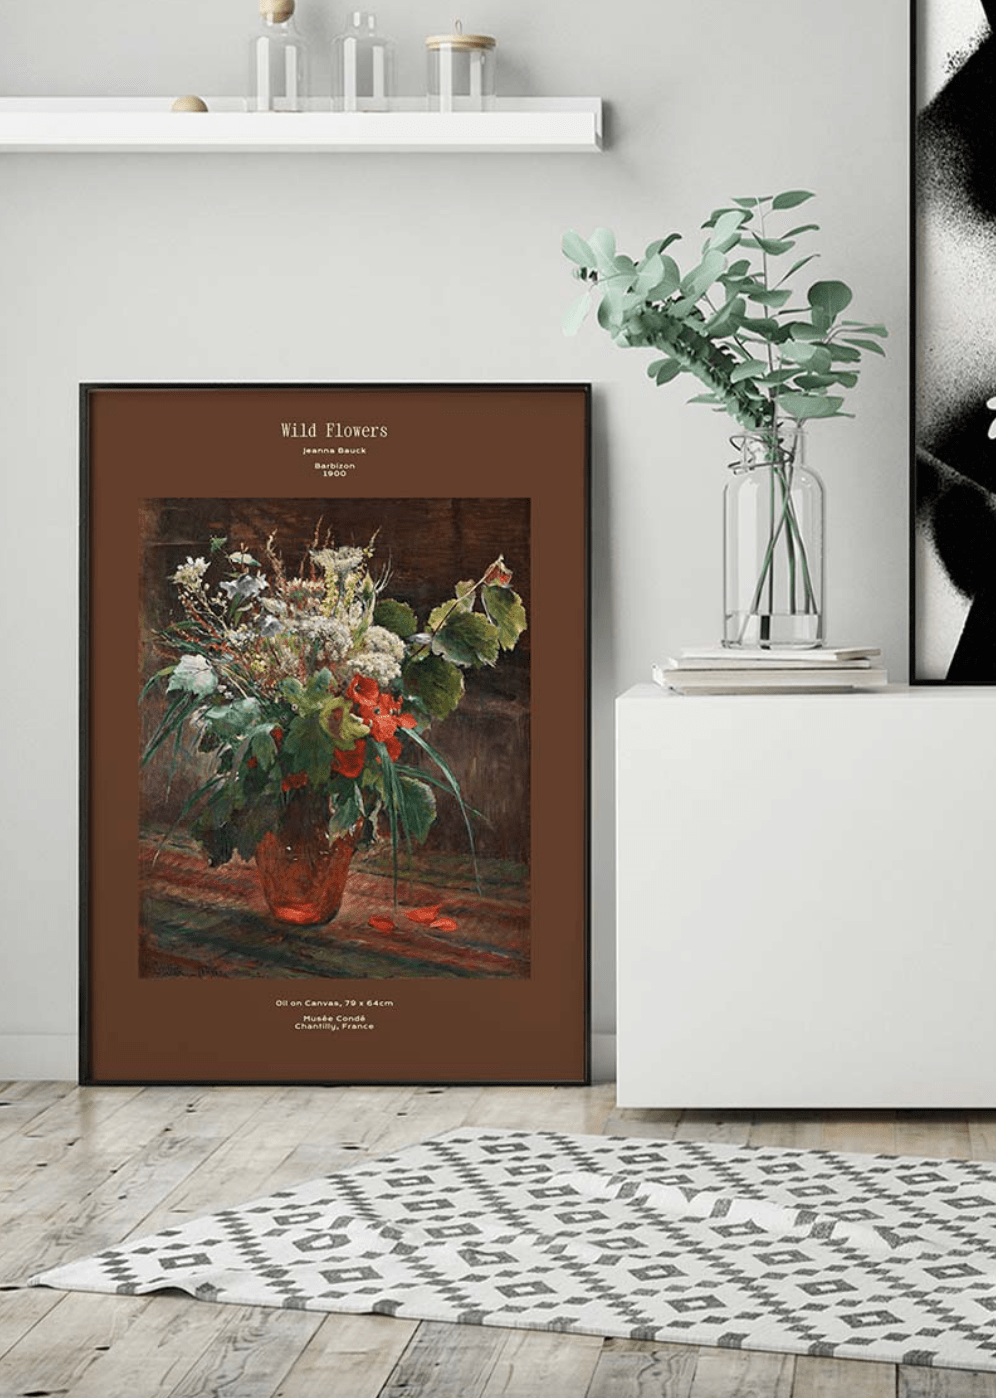 Botanical Art Prints: Adding Life and Beauty to Your Space